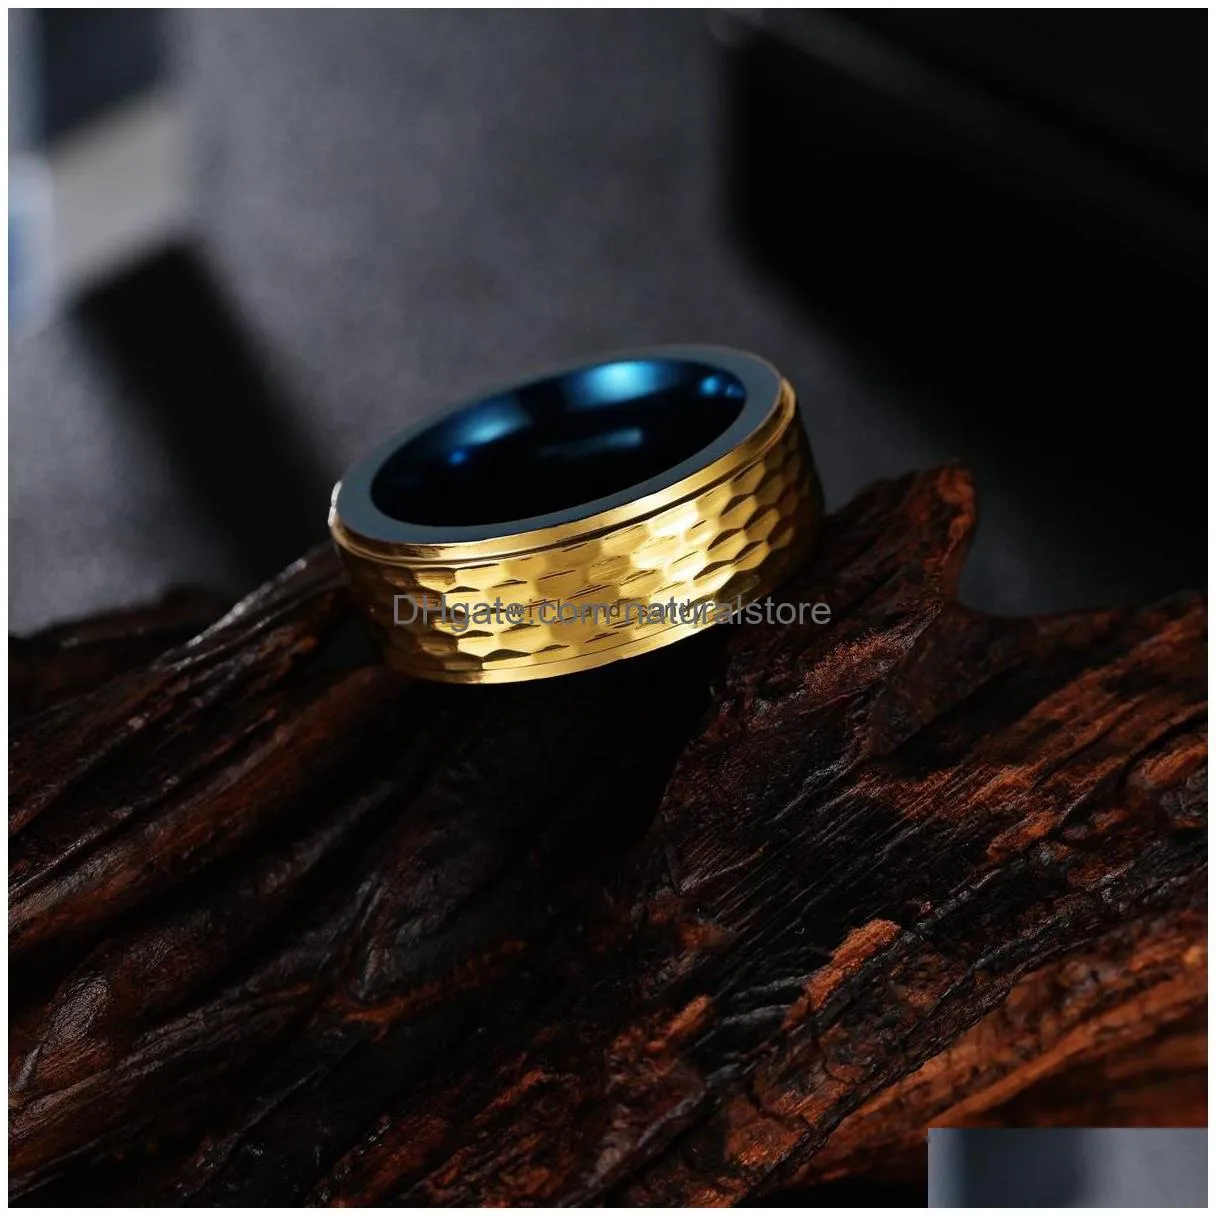 8mm blue gold two-tone tungsten steel ring band finger men rough hip hop punk carbide rings fashion jewelry gift will and sandy